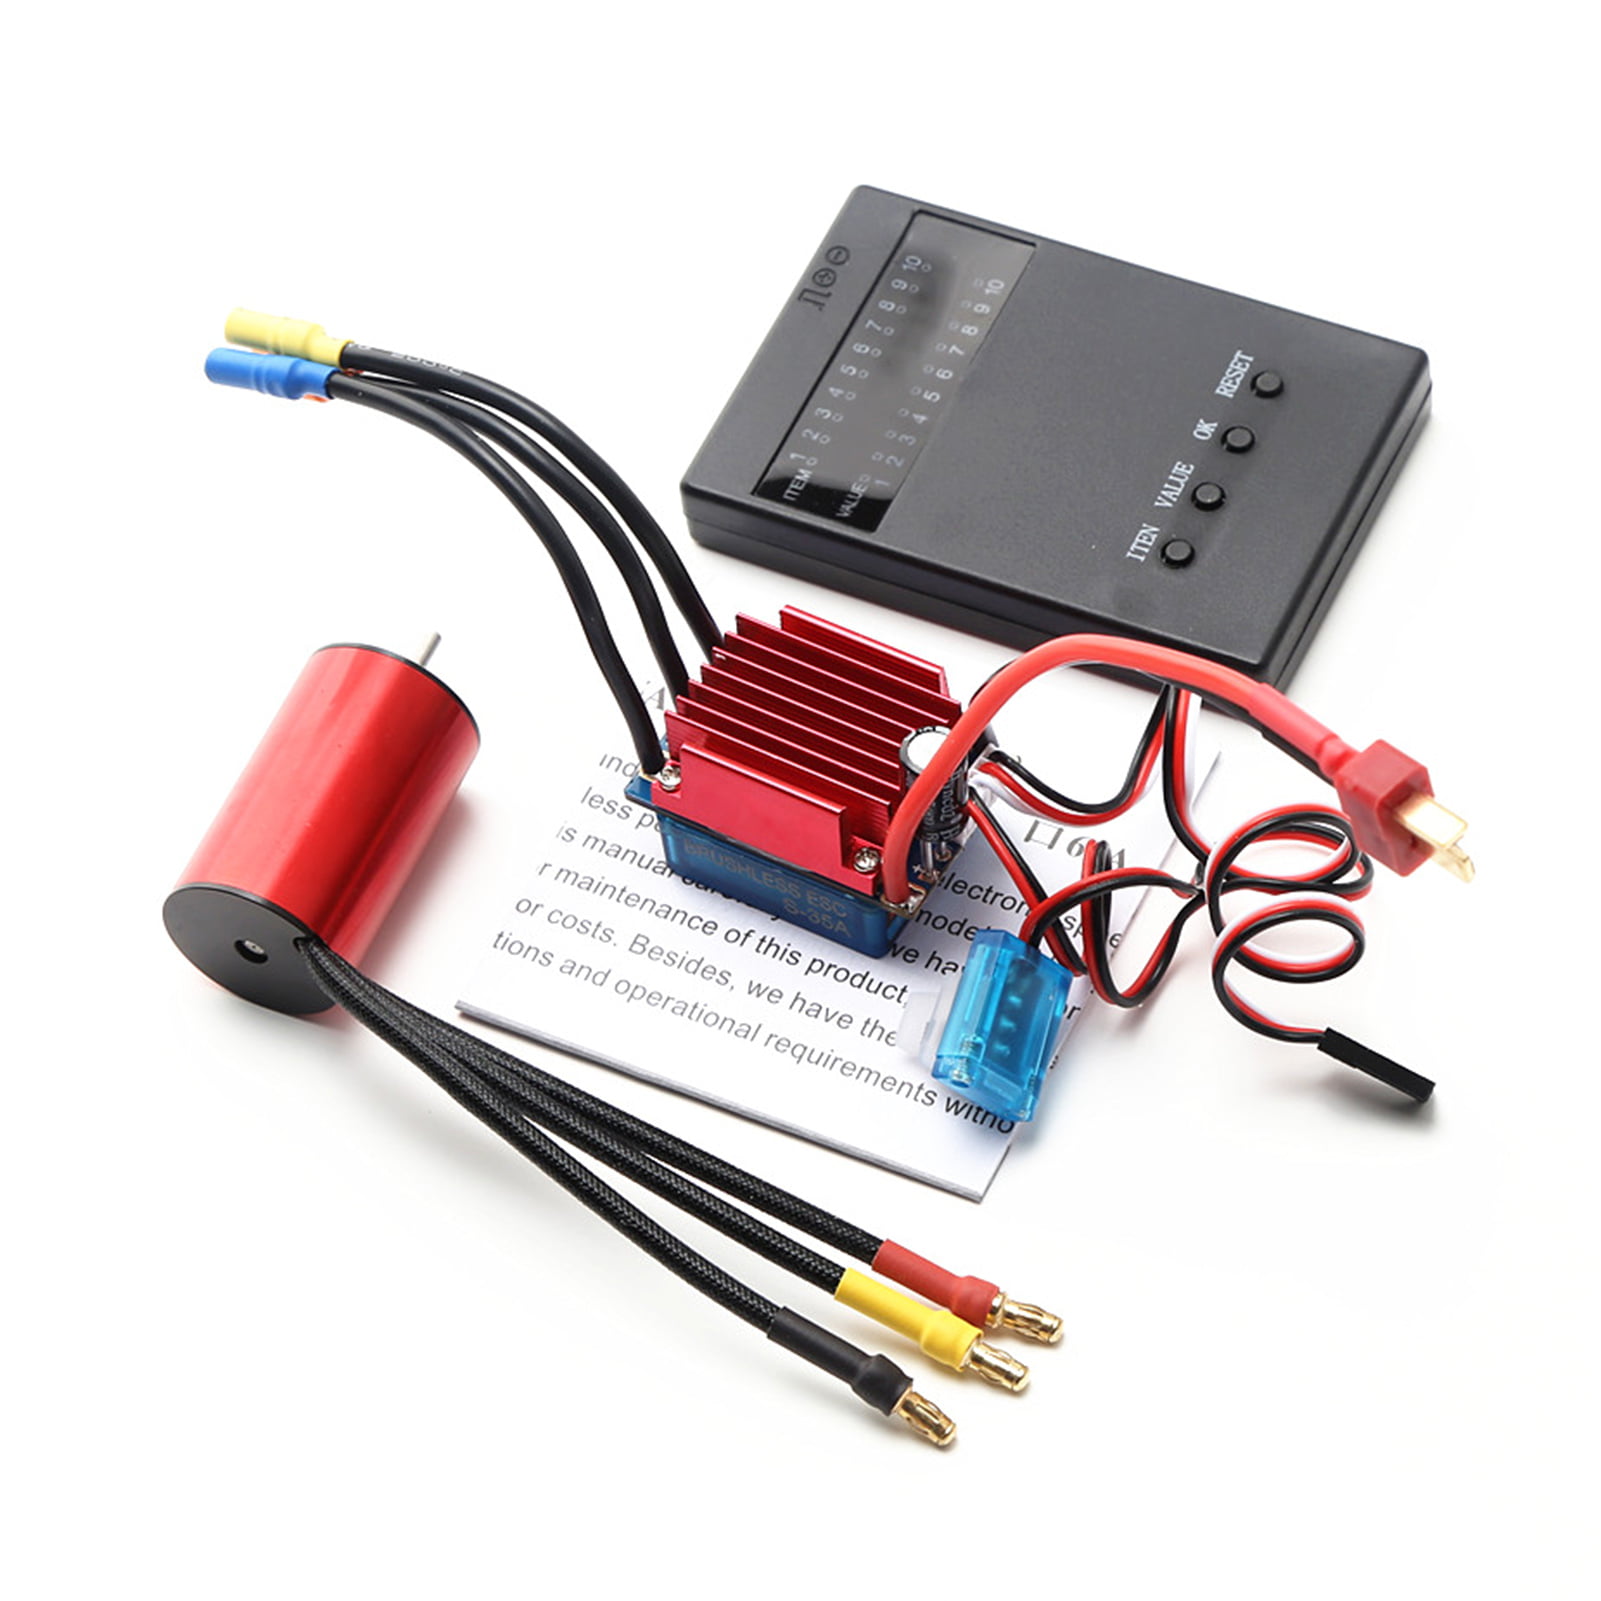 GoolRC S2440 2440 Brushless Motor 4000KV 35A Brushless ESC Electric Speed Controller Replacement for Traxxas HSP Wltoys 1/16 1/18 RC Truck 